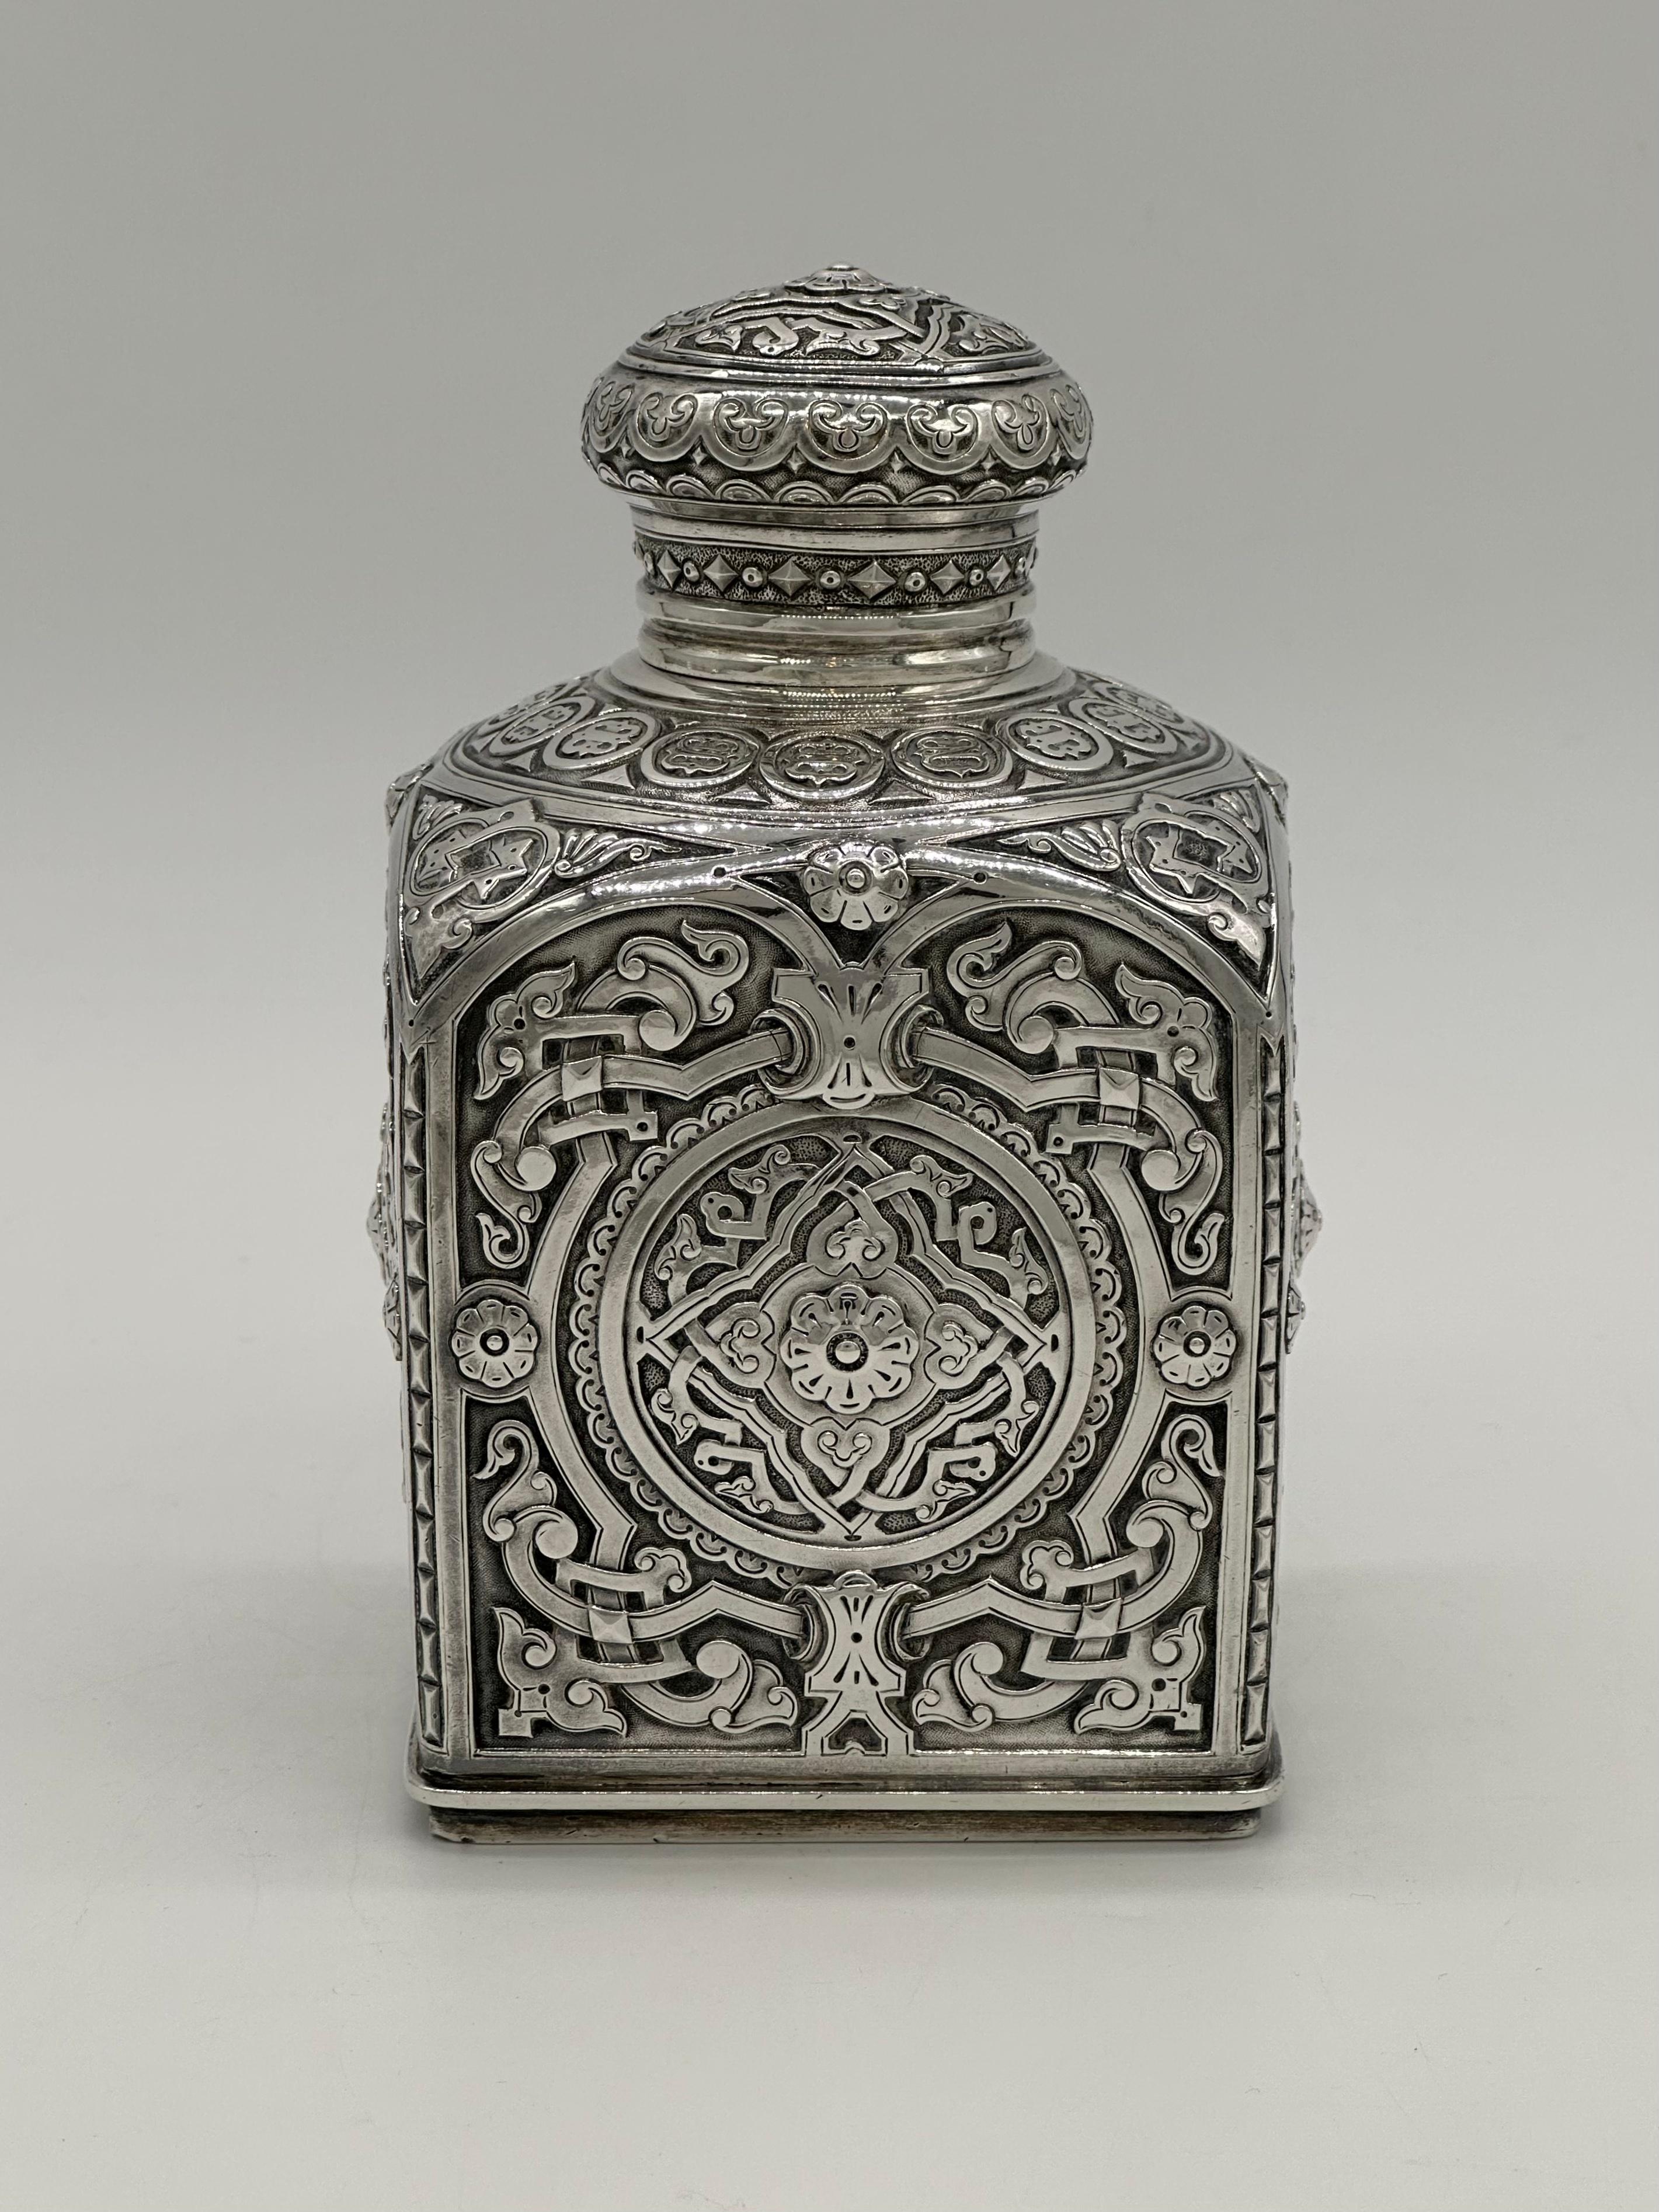 Gilt Amazing Antique Russian Imperial Silver Tea Caddy, Loskutov, Moscow 1889